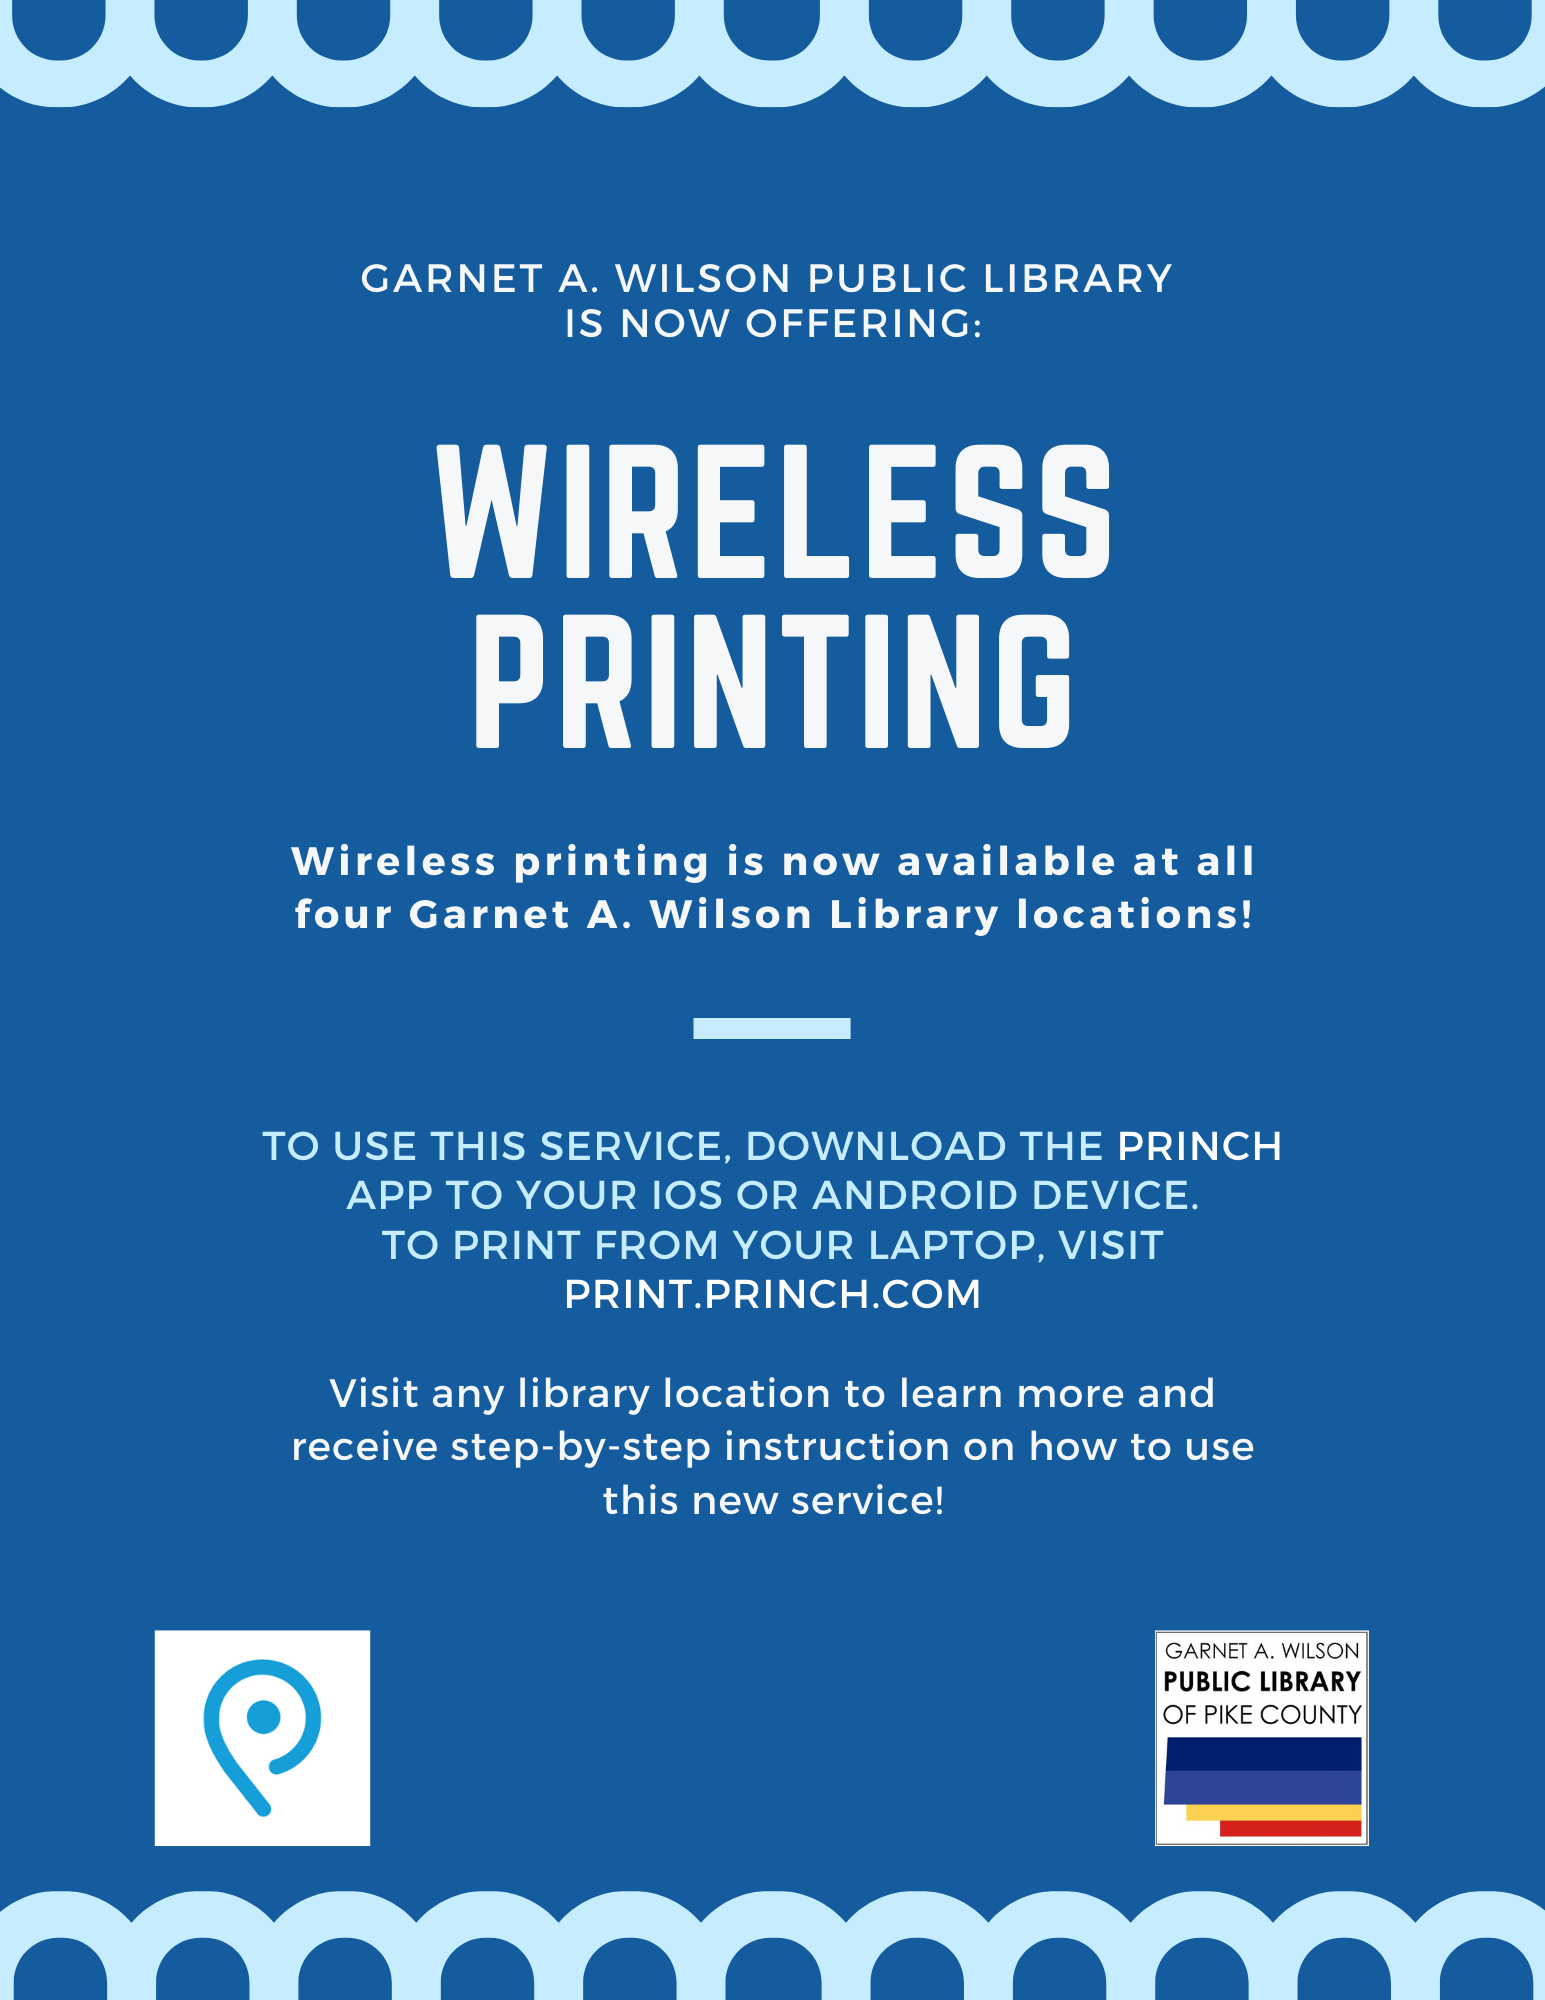 A flyer listing the information for the new wireless printing service at the library. 